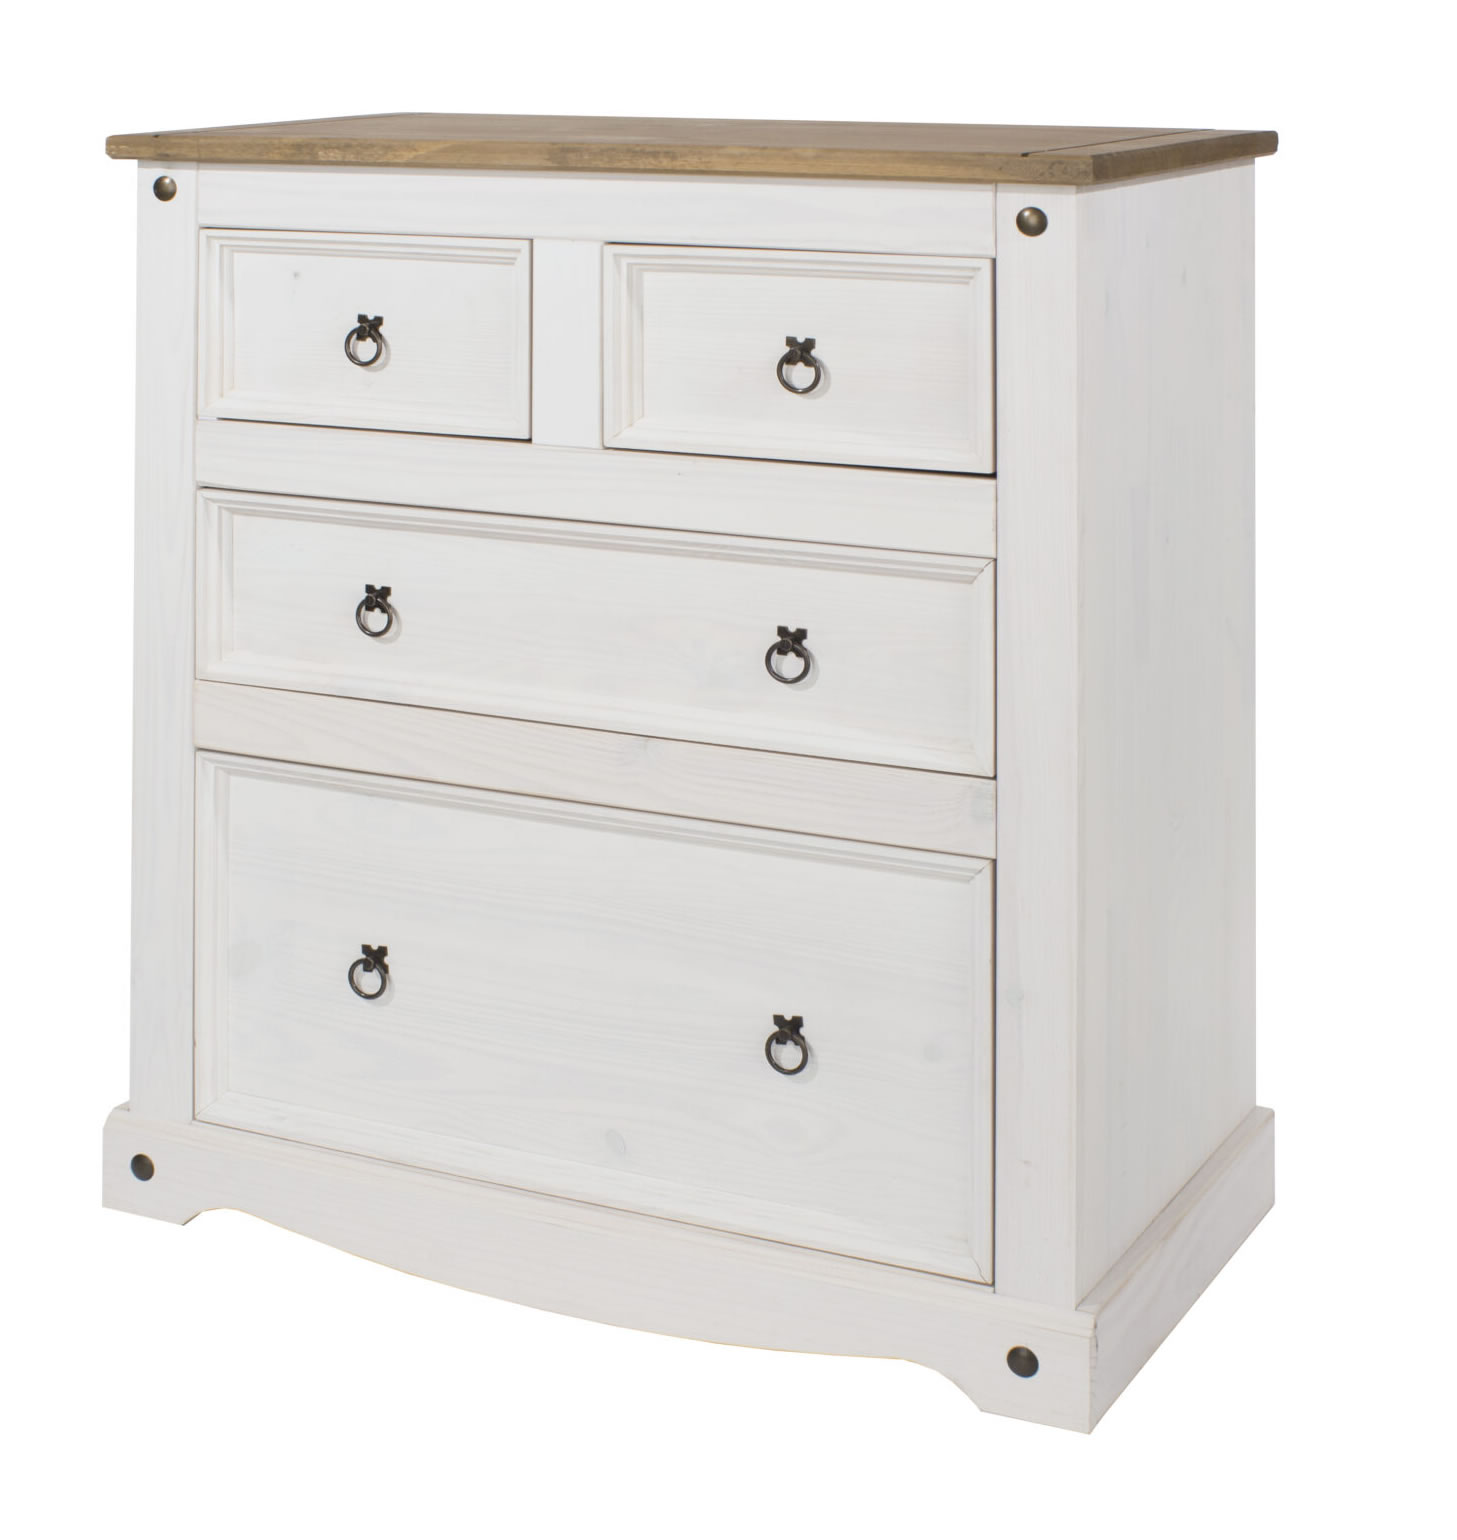 Carala Pine White 2+2 Drawer Chest White Painted Bedroom Chest.